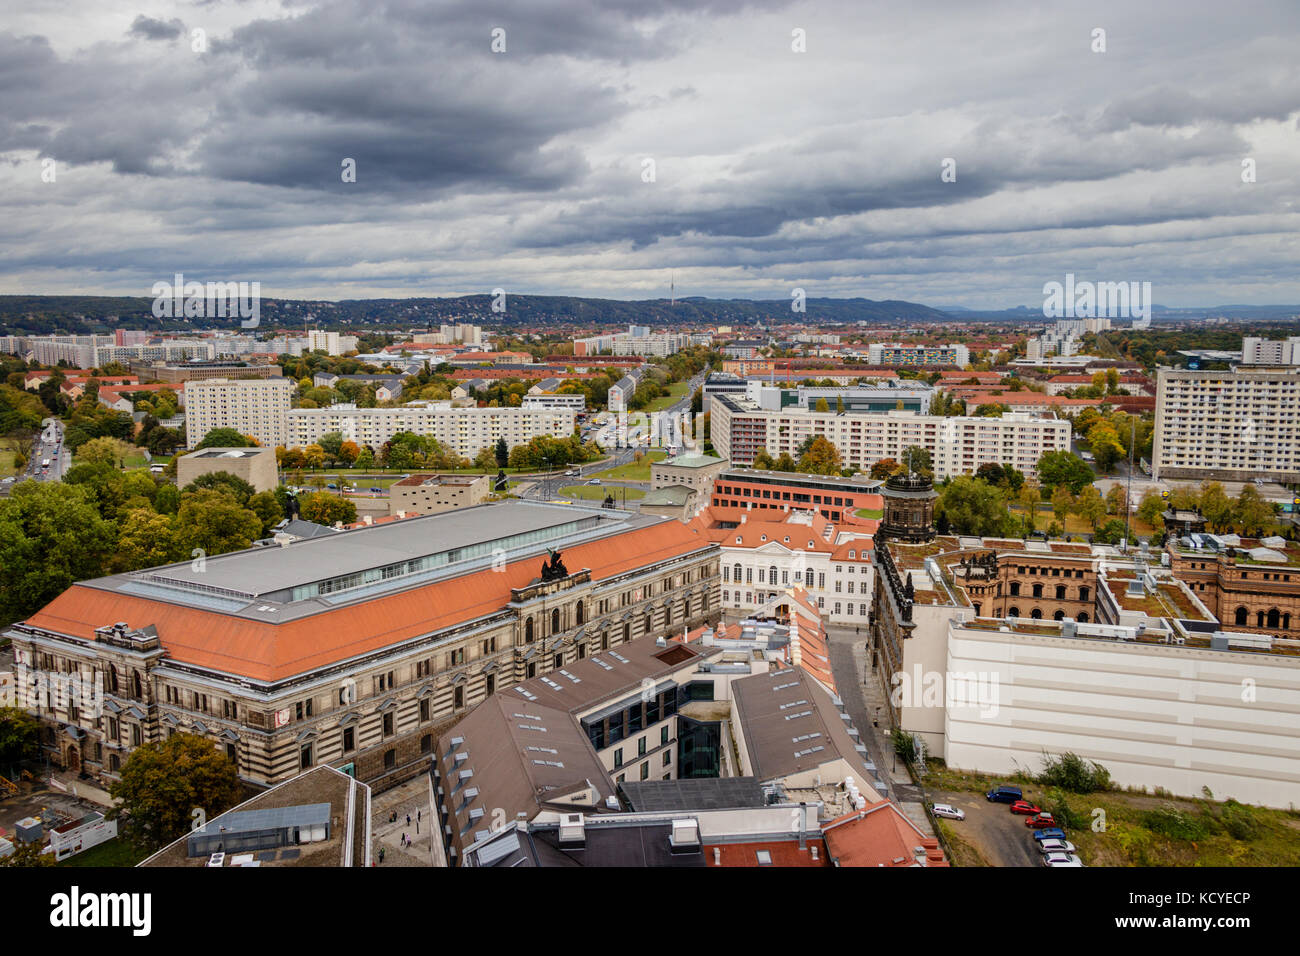 City view of Dresden in east Germany on a stormy autumn October day with the old Plattenbau, prefabricated concrete slabs in the foreground Stock Photo